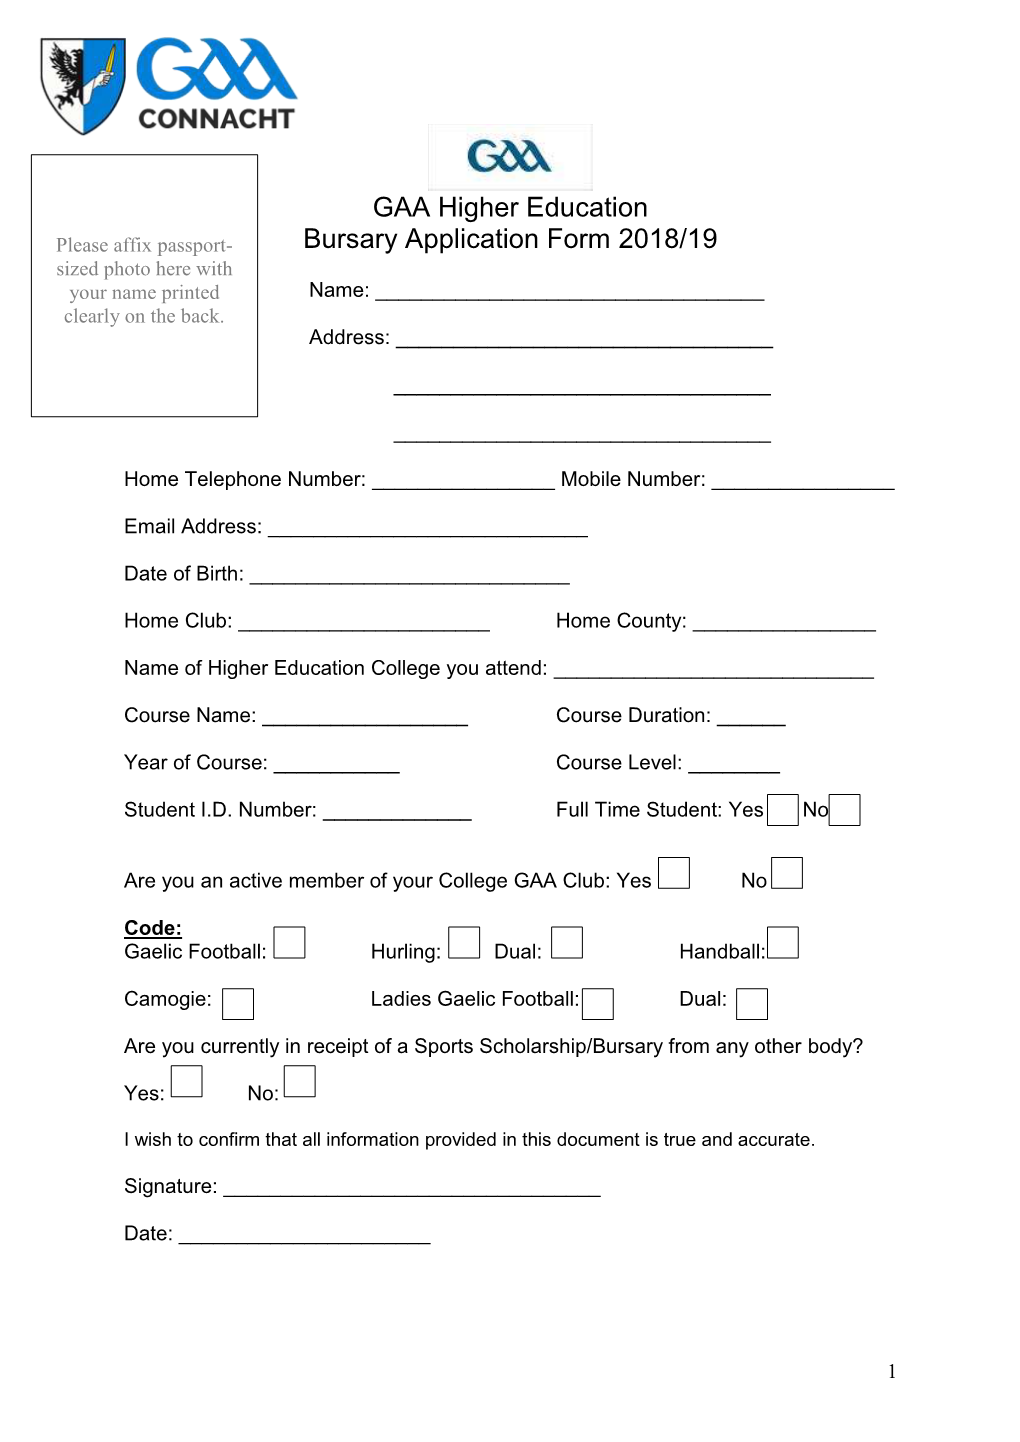 GAA HIGHER EDUCATION BURSARY APPLICATION FORM 2018/19 to Be Completed by College Registrar Only